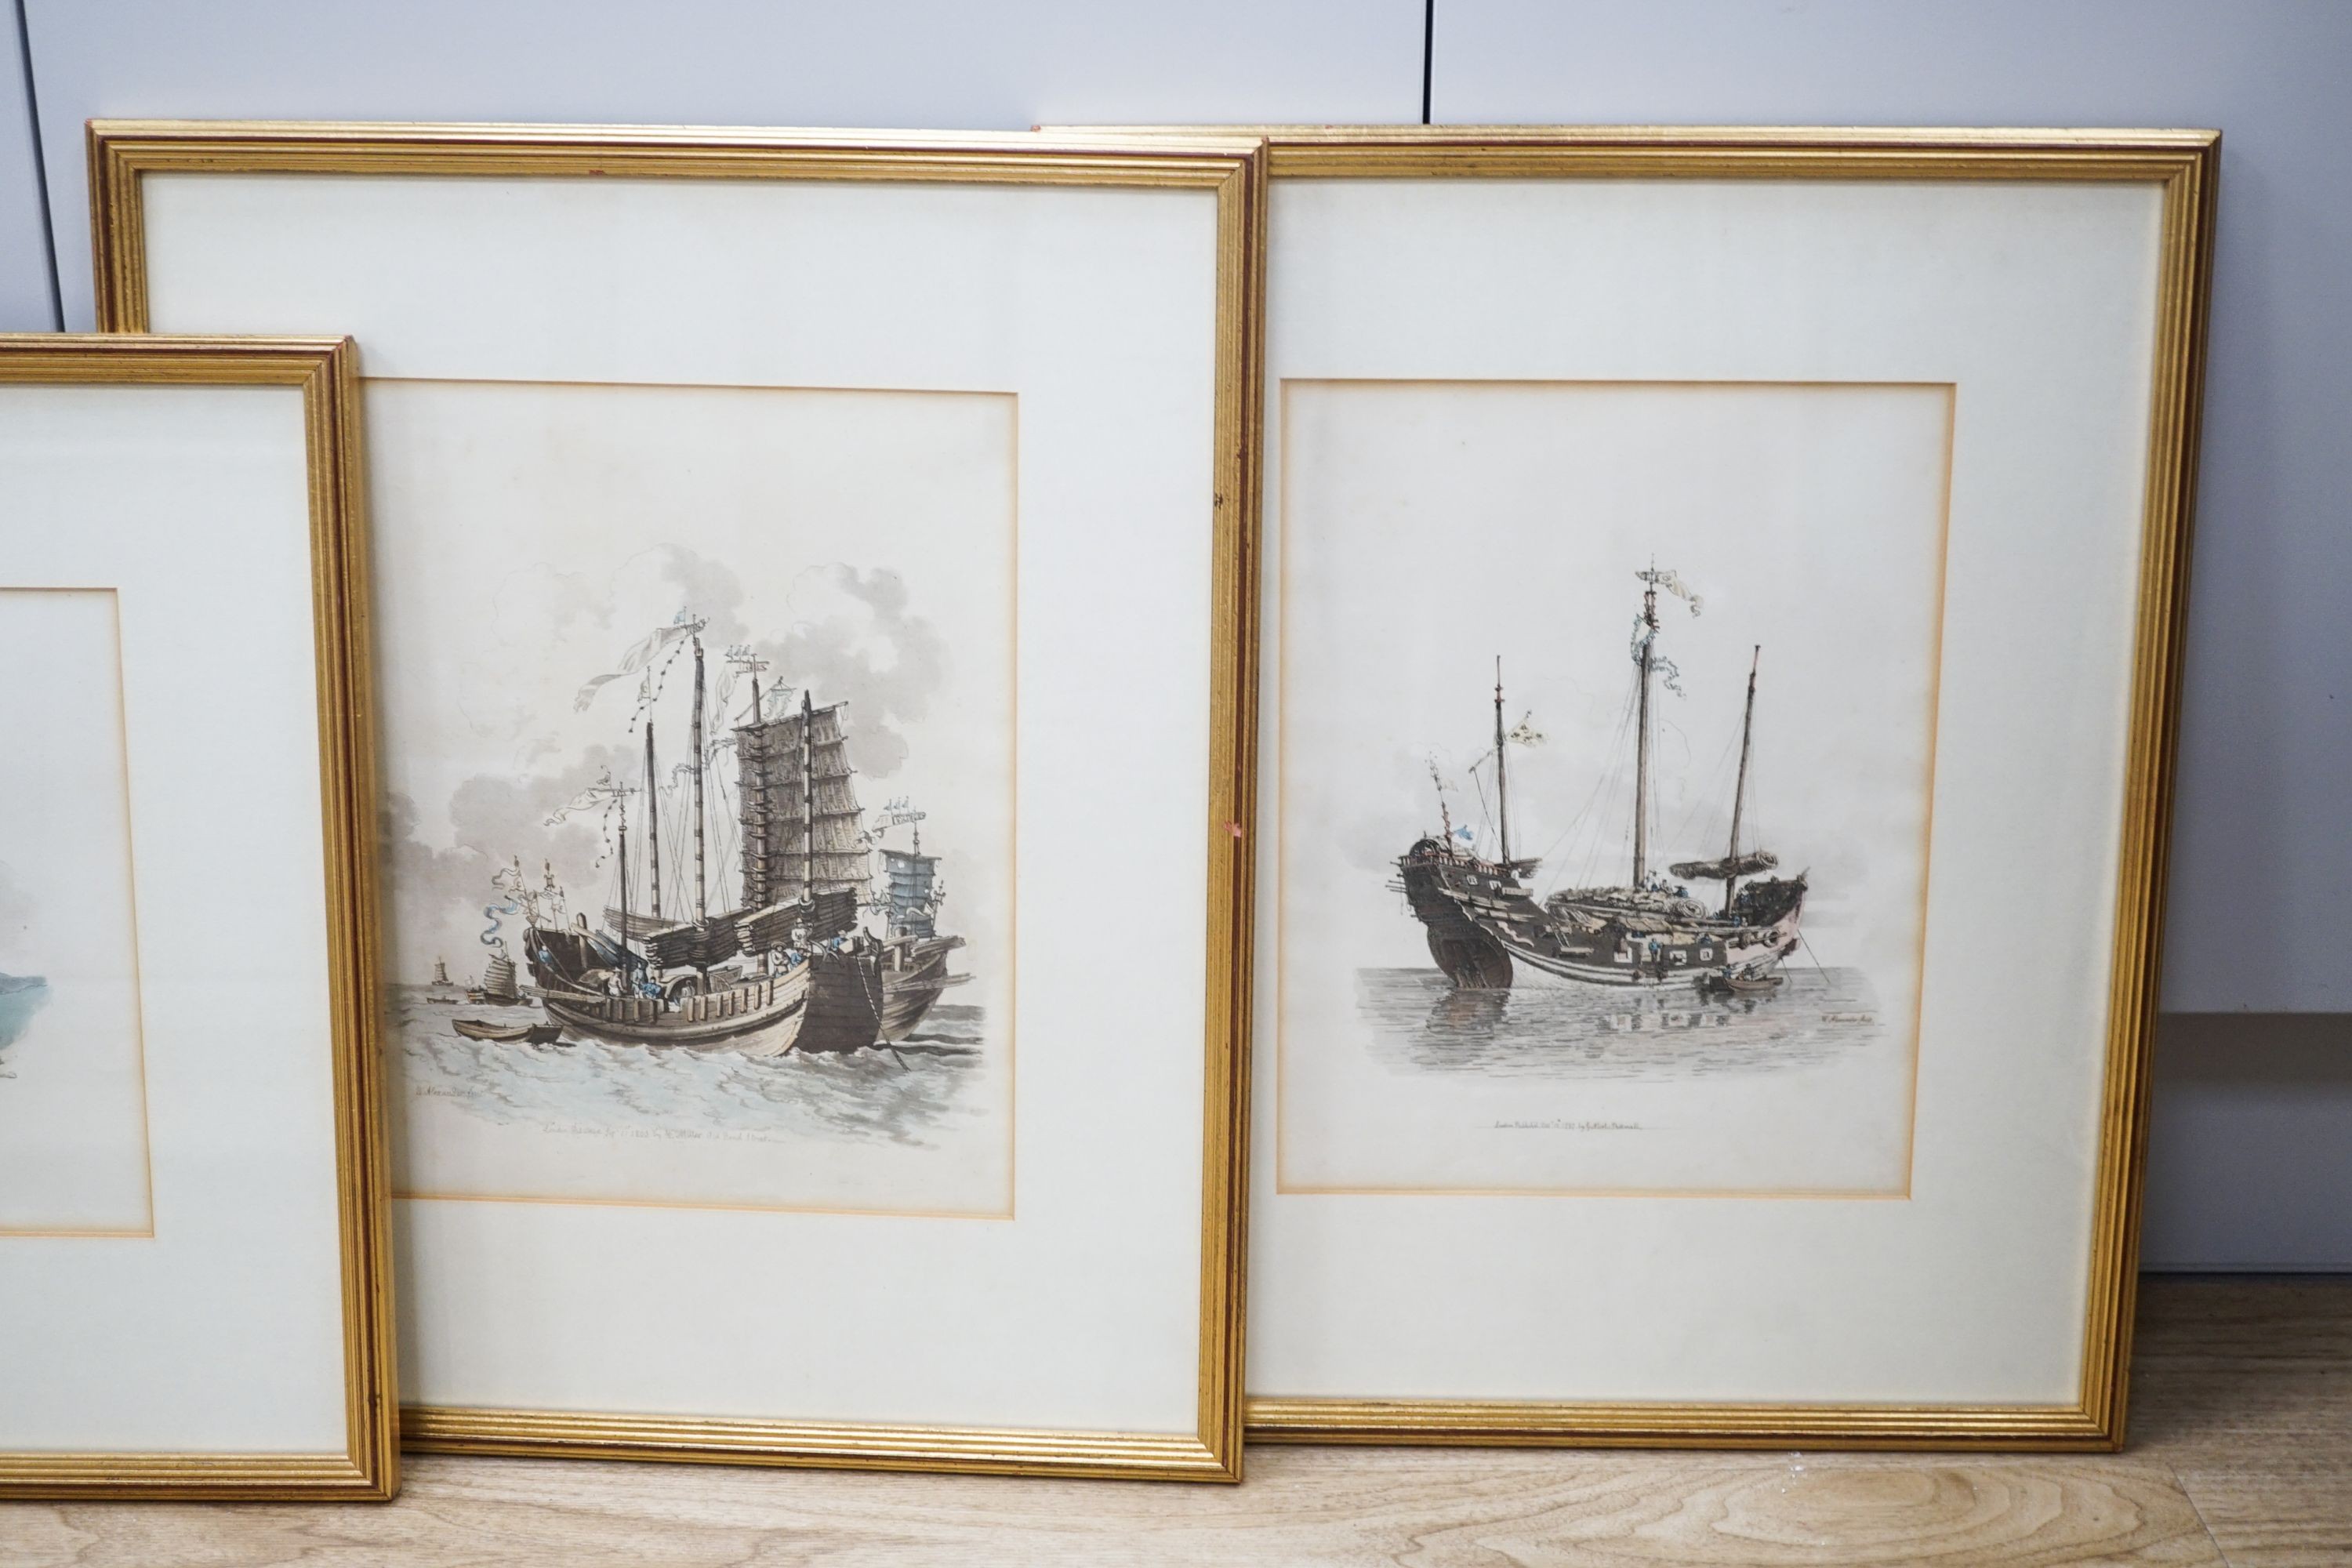 After William Alexander, six coloured lithographs, Views of China, approx. 24 x 31cm